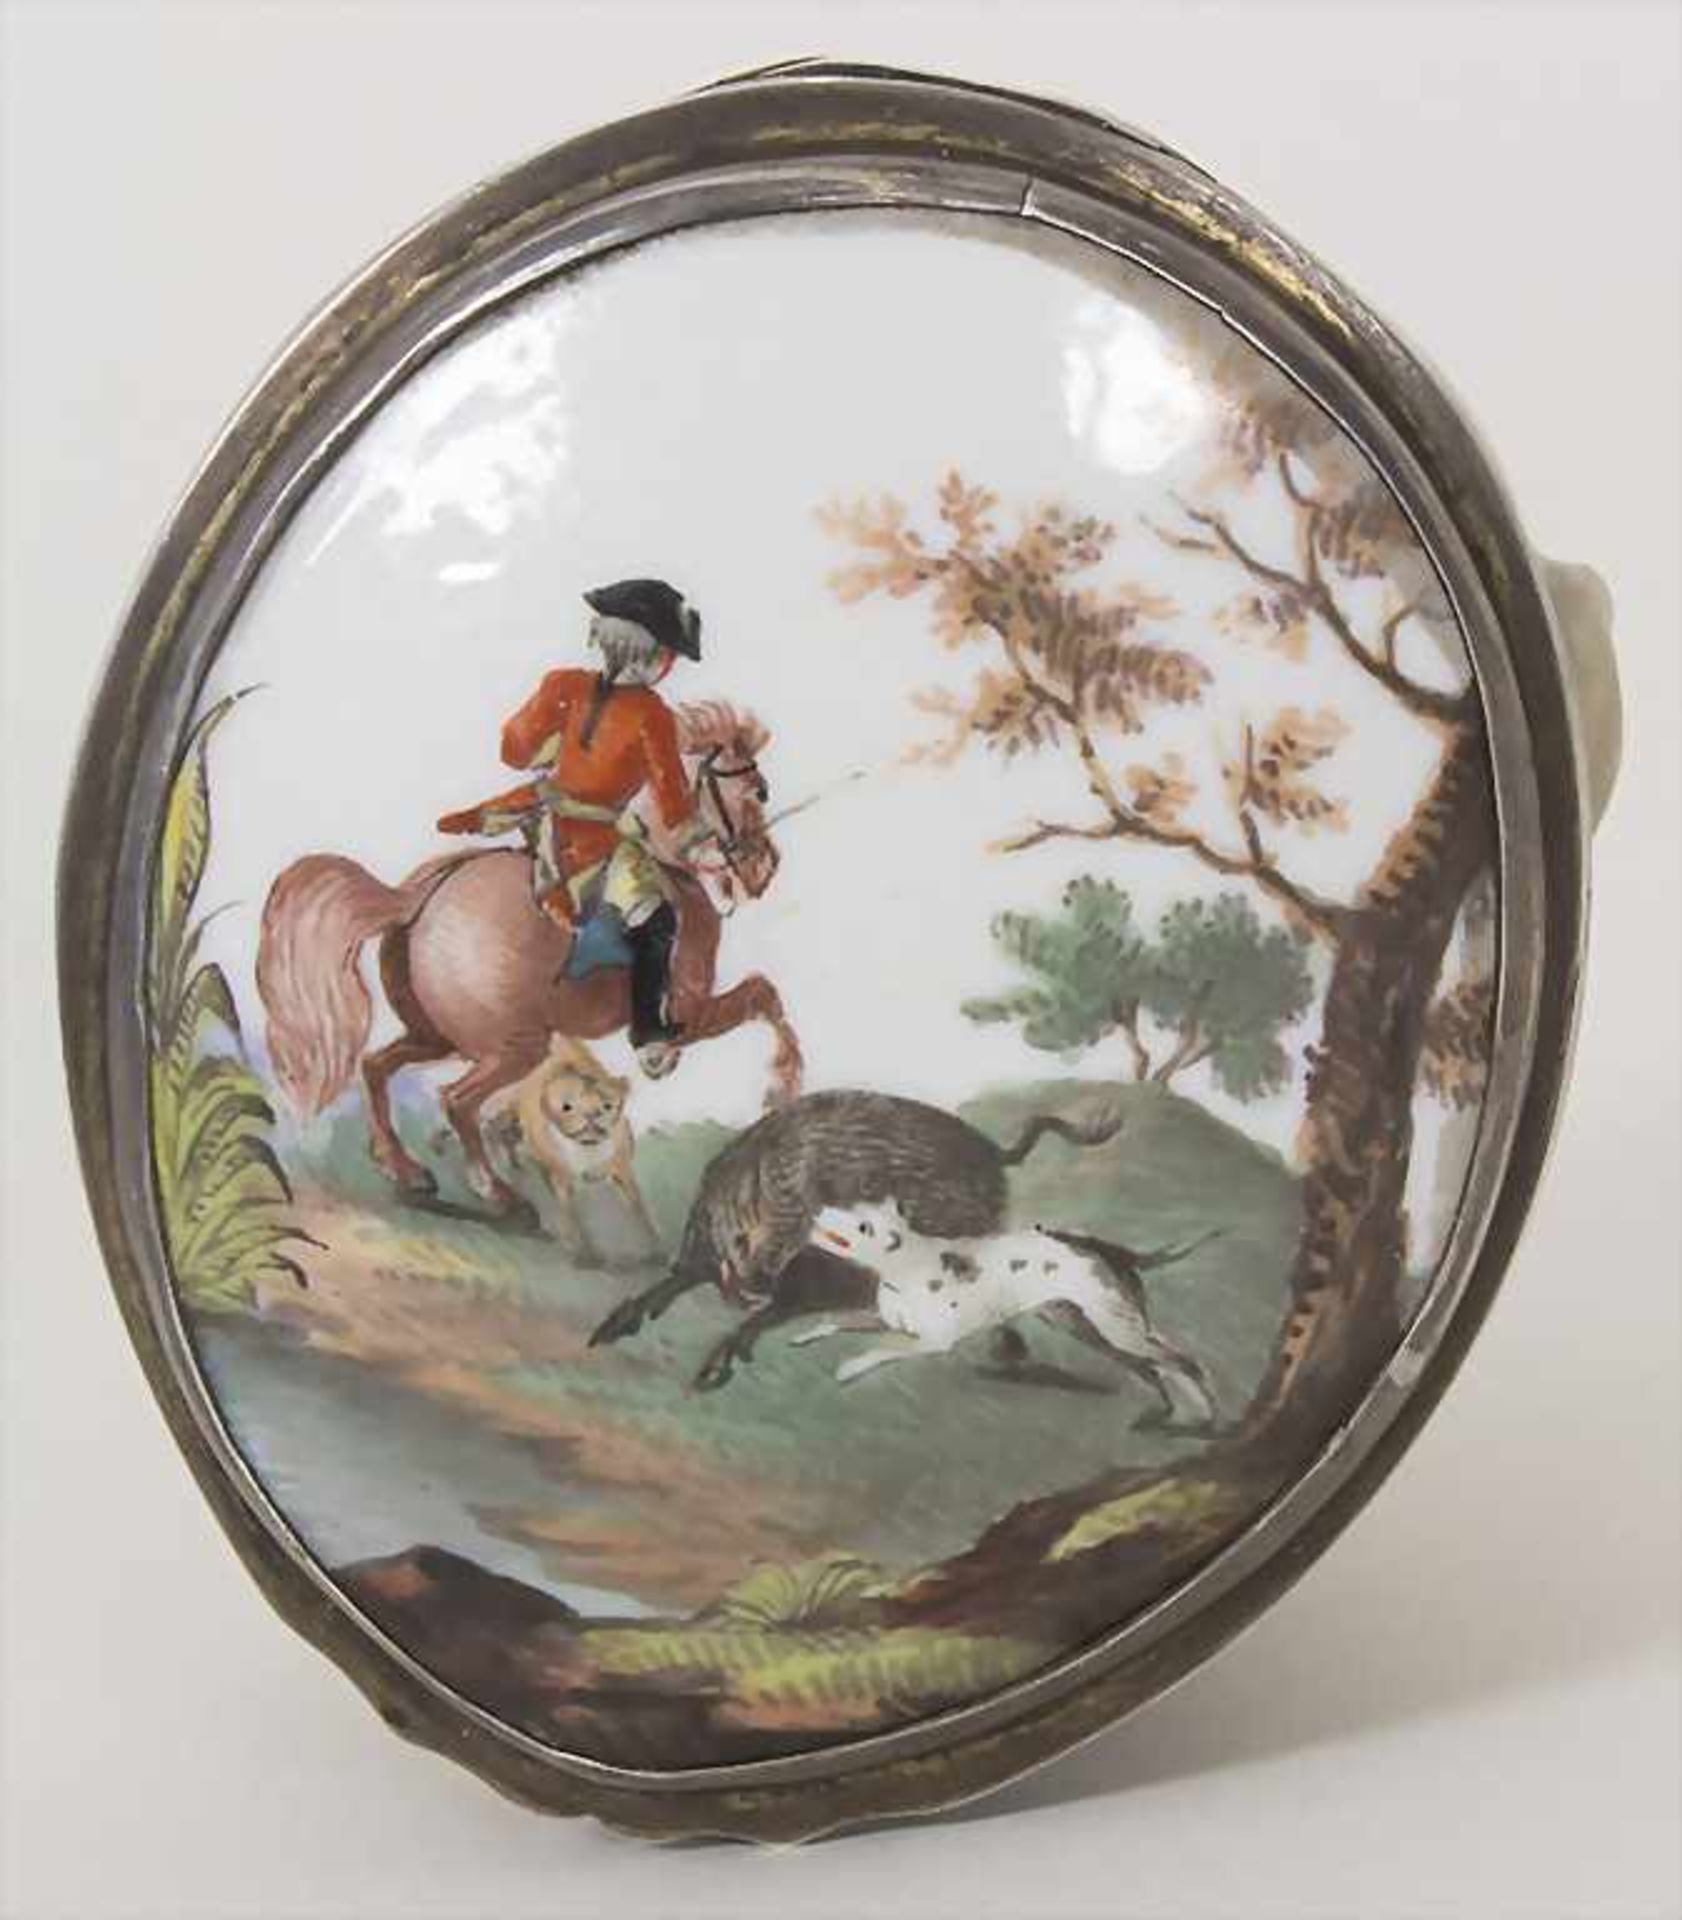 Tabatiere 'Mopskopf' / A snuff-box in the form of a pug's head, Meissen, um 1750Material: Porzellan, - Image 11 of 11